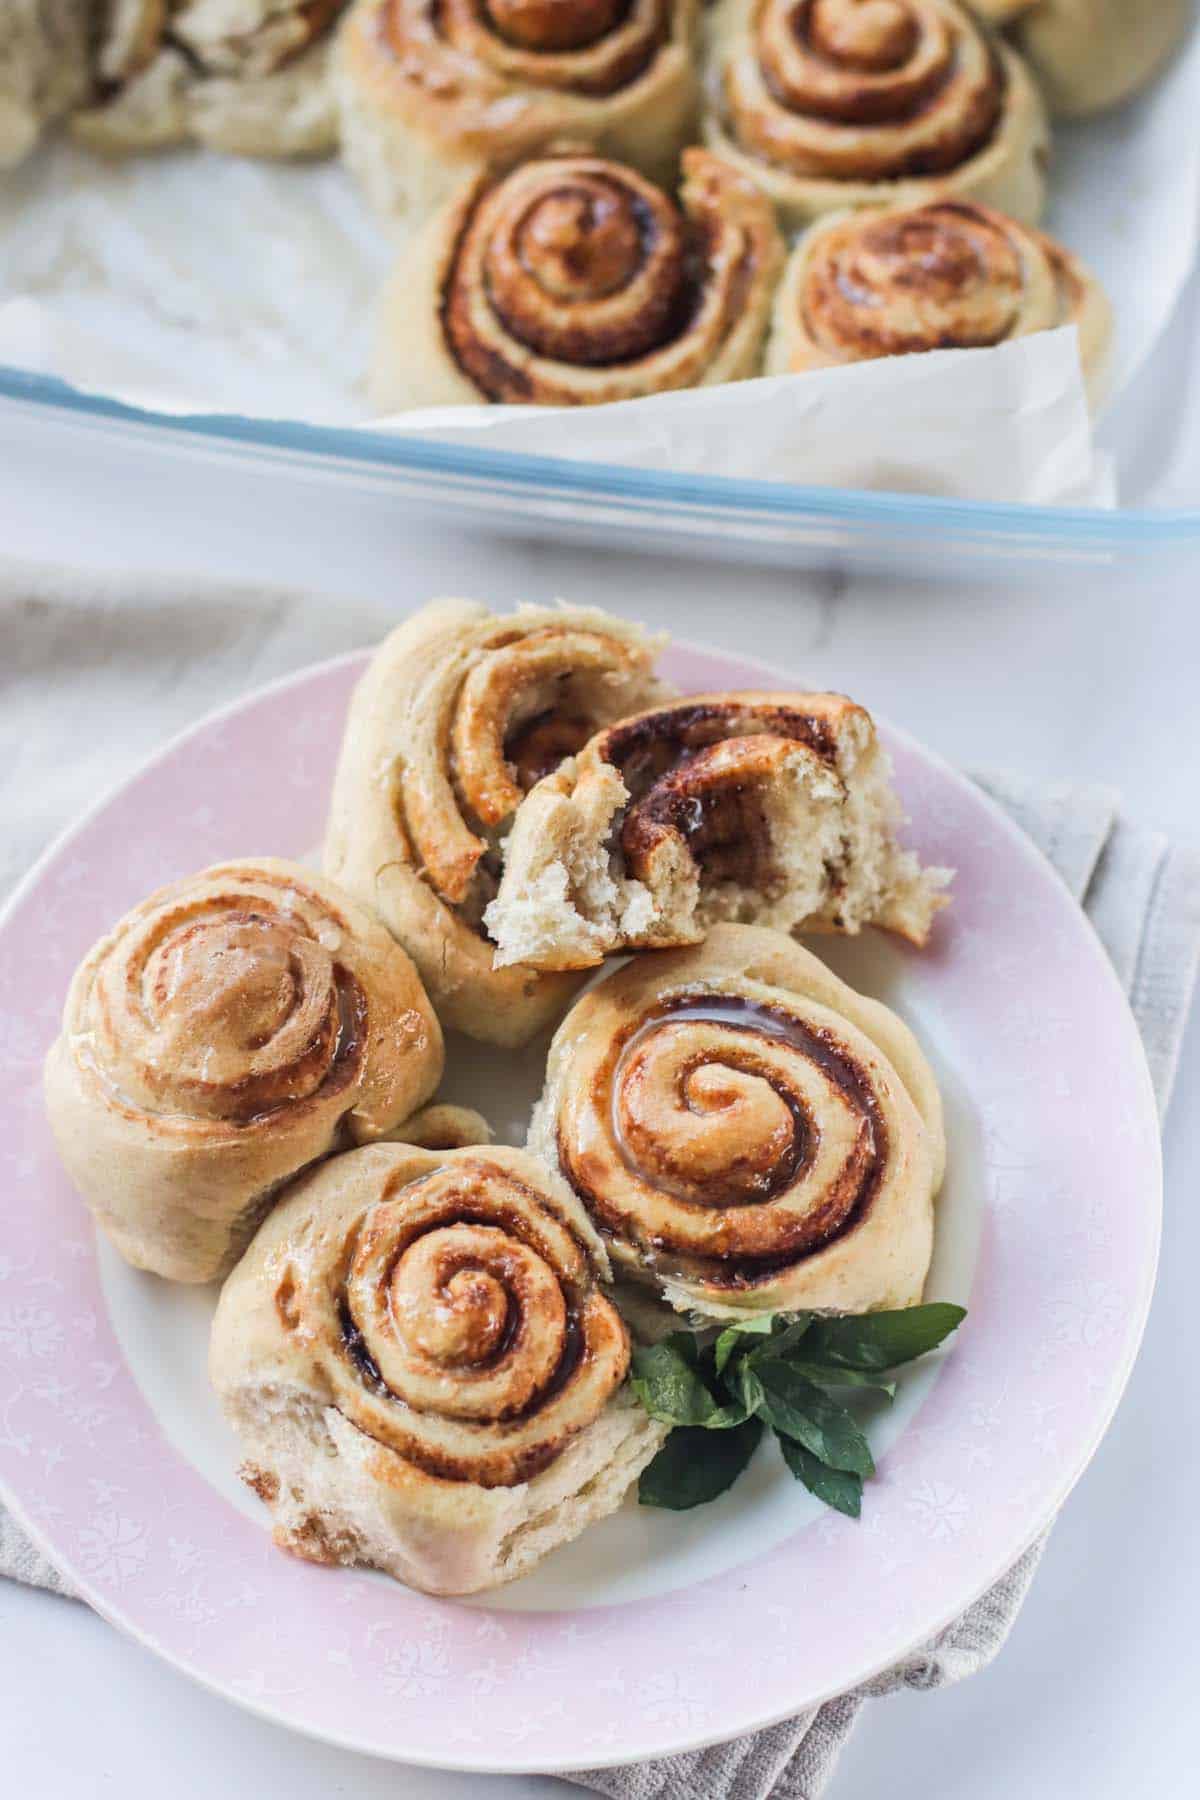 Cinnamon rolls on a plate and one is cut in half.